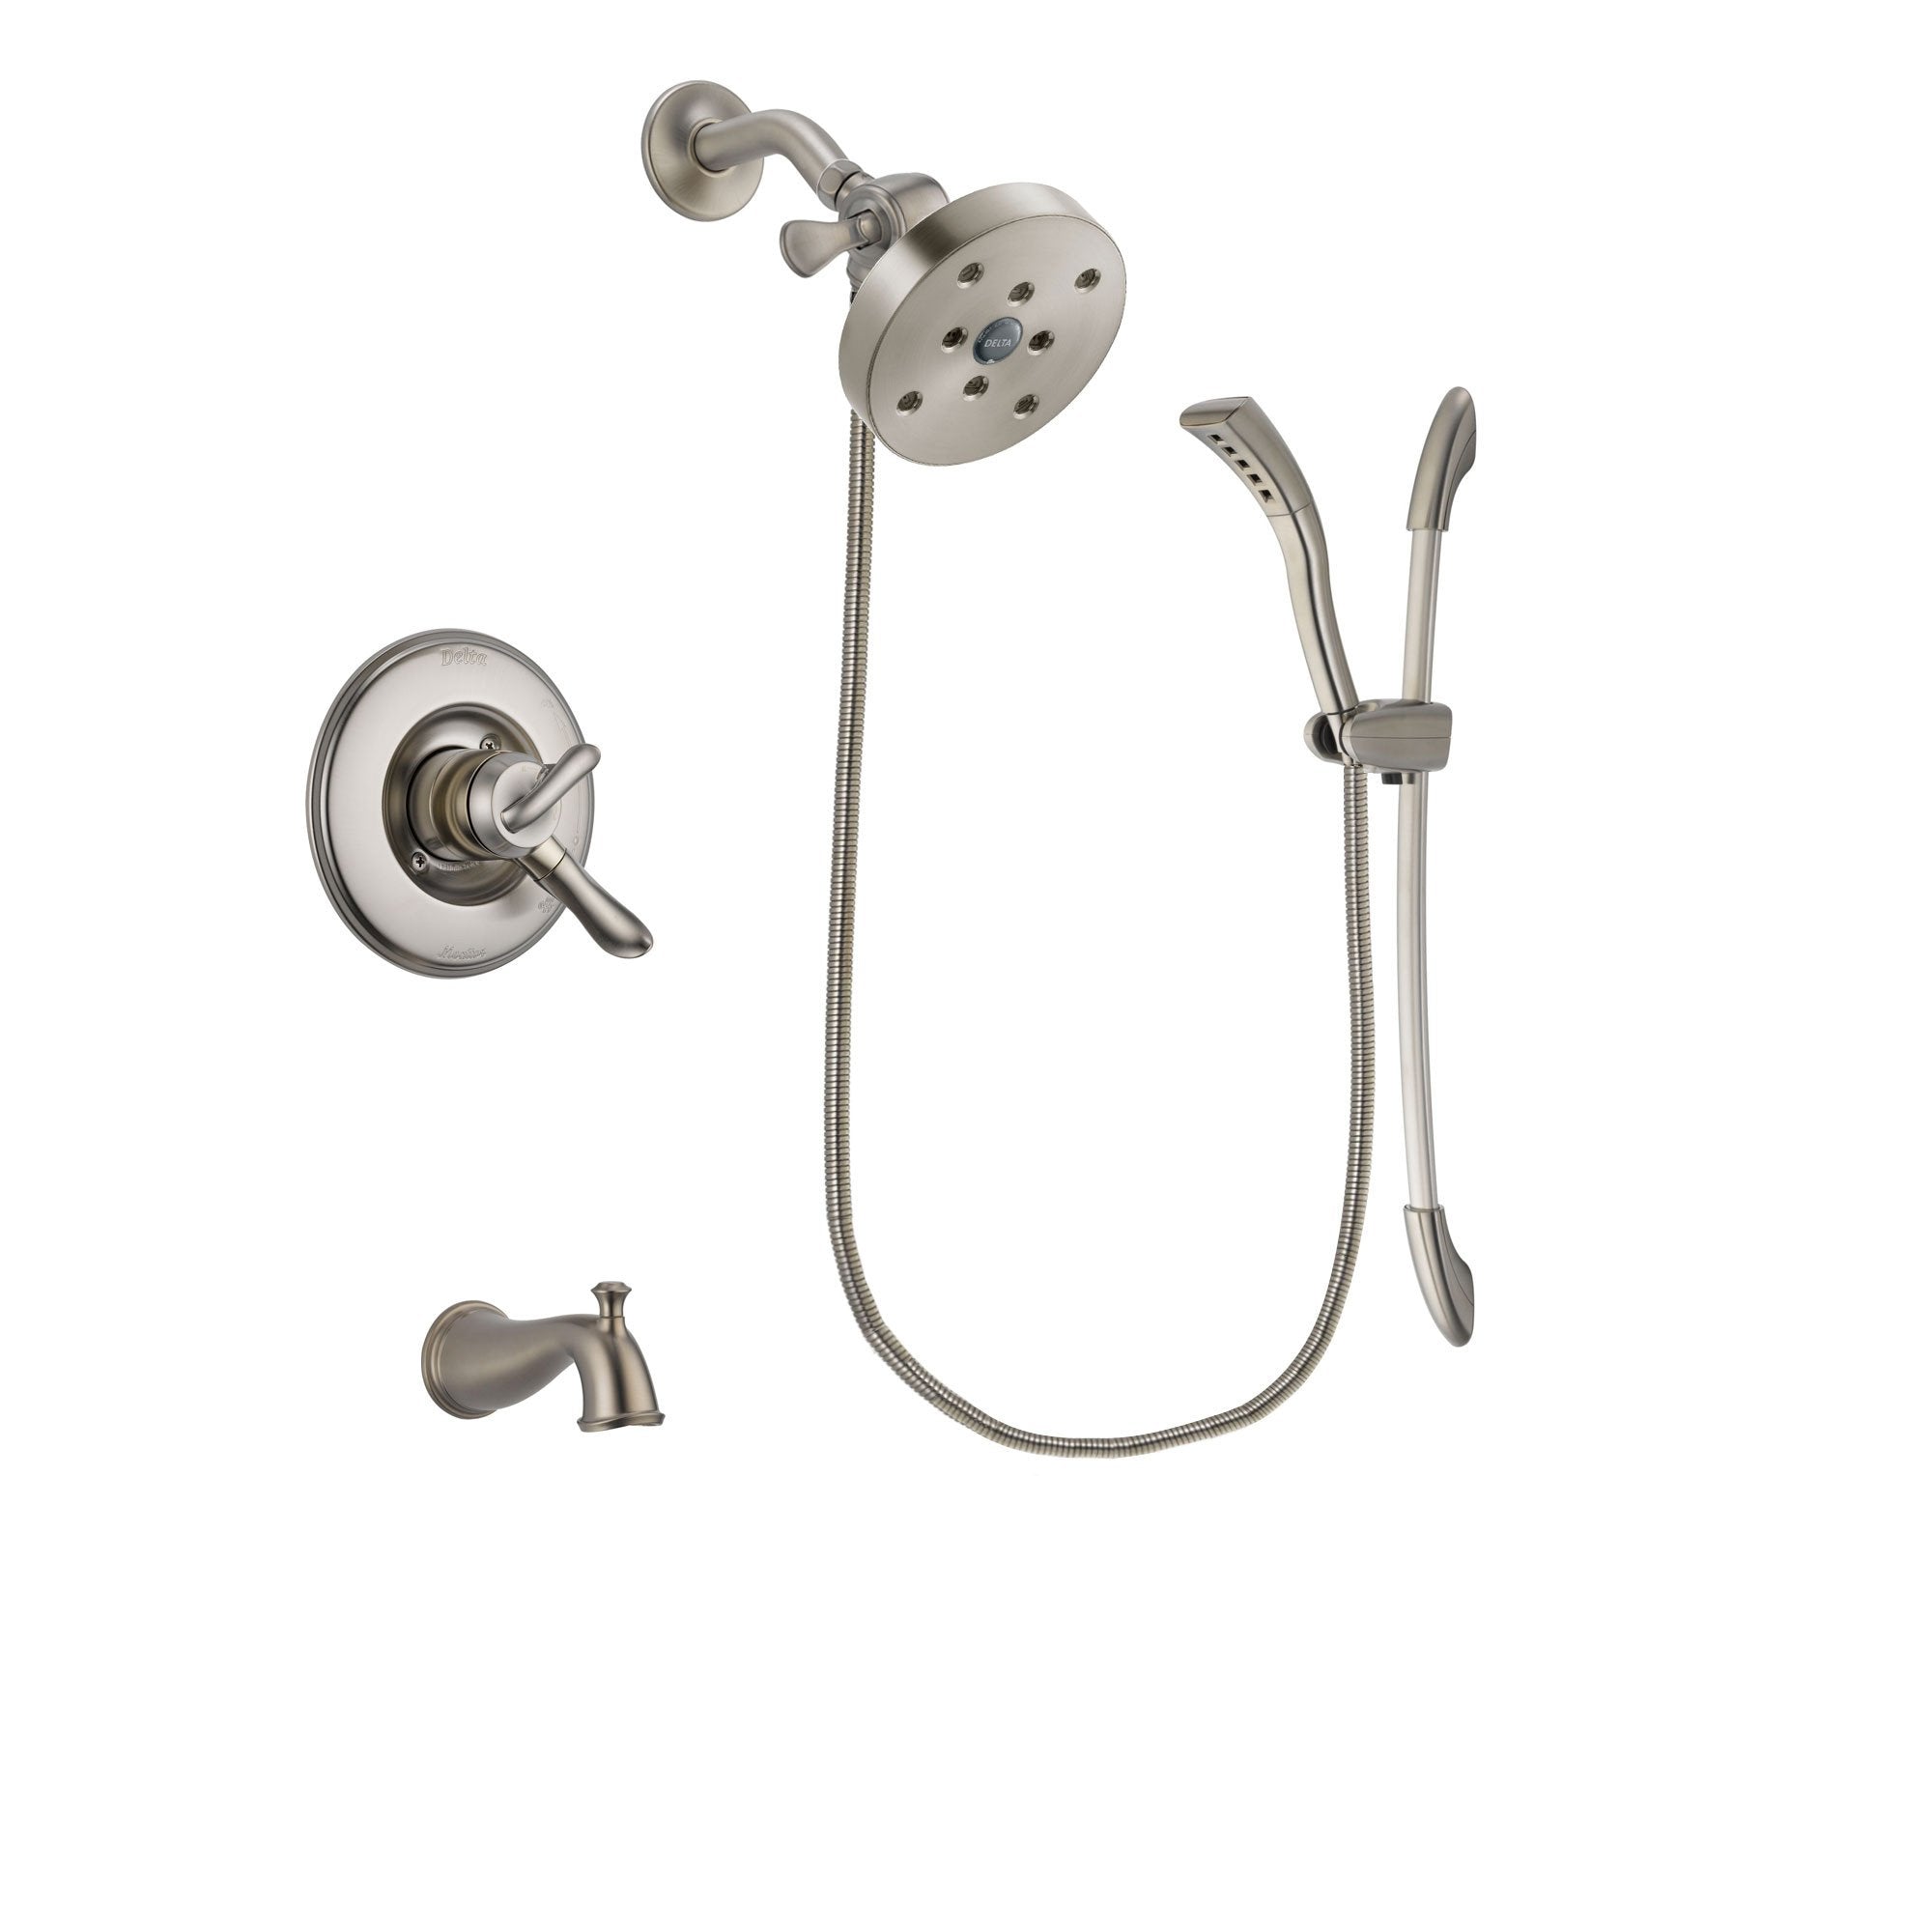 Delta Linden Stainless Steel Finish Dual Control Tub and Shower Faucet System Package with 5-1/2 inch Shower Head and Handshower with Slide Bar Includes Rough-in Valve and Tub Spout DSP1509V